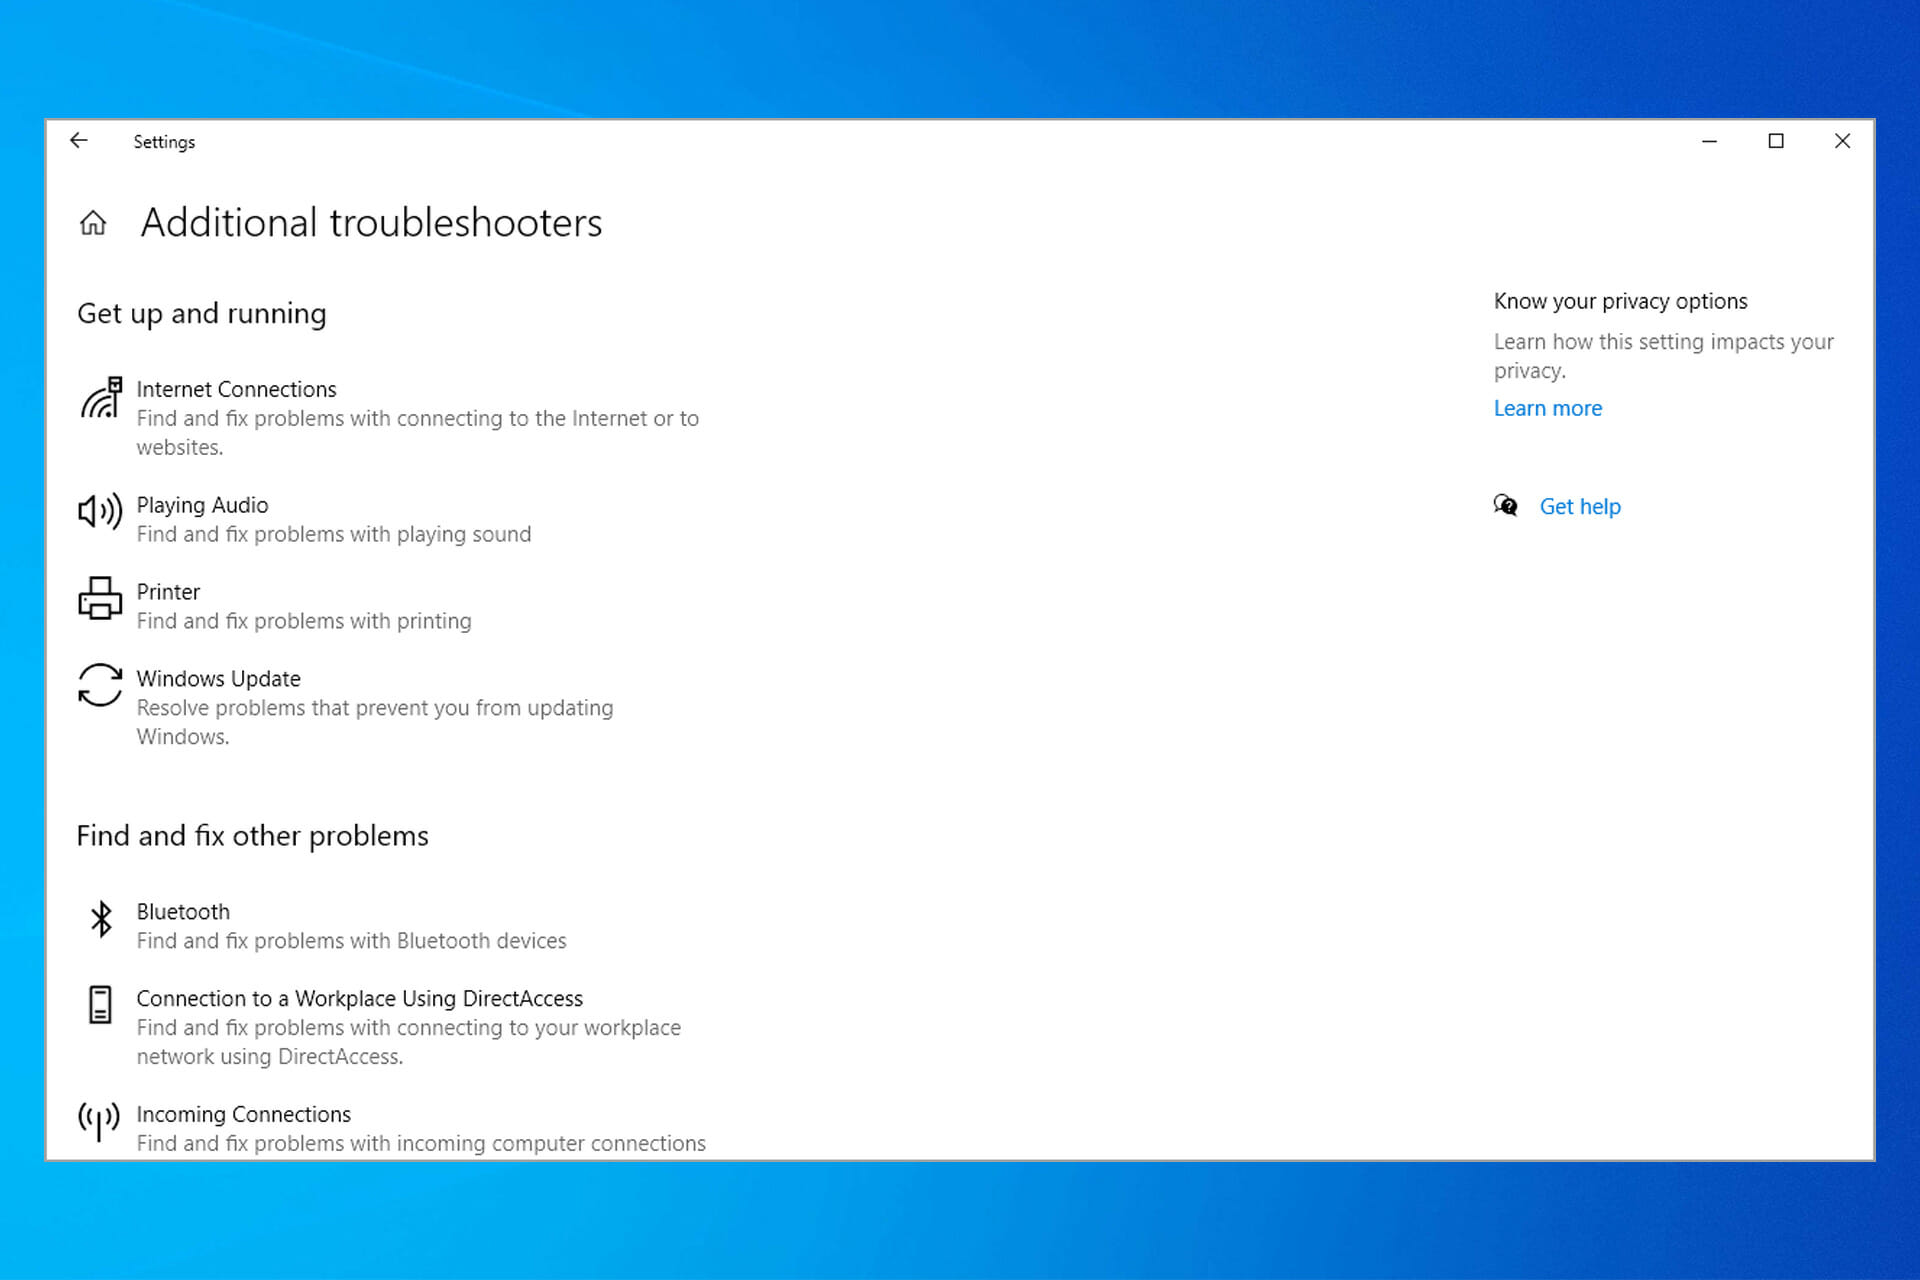 Windows Troubleshooter has stopped working